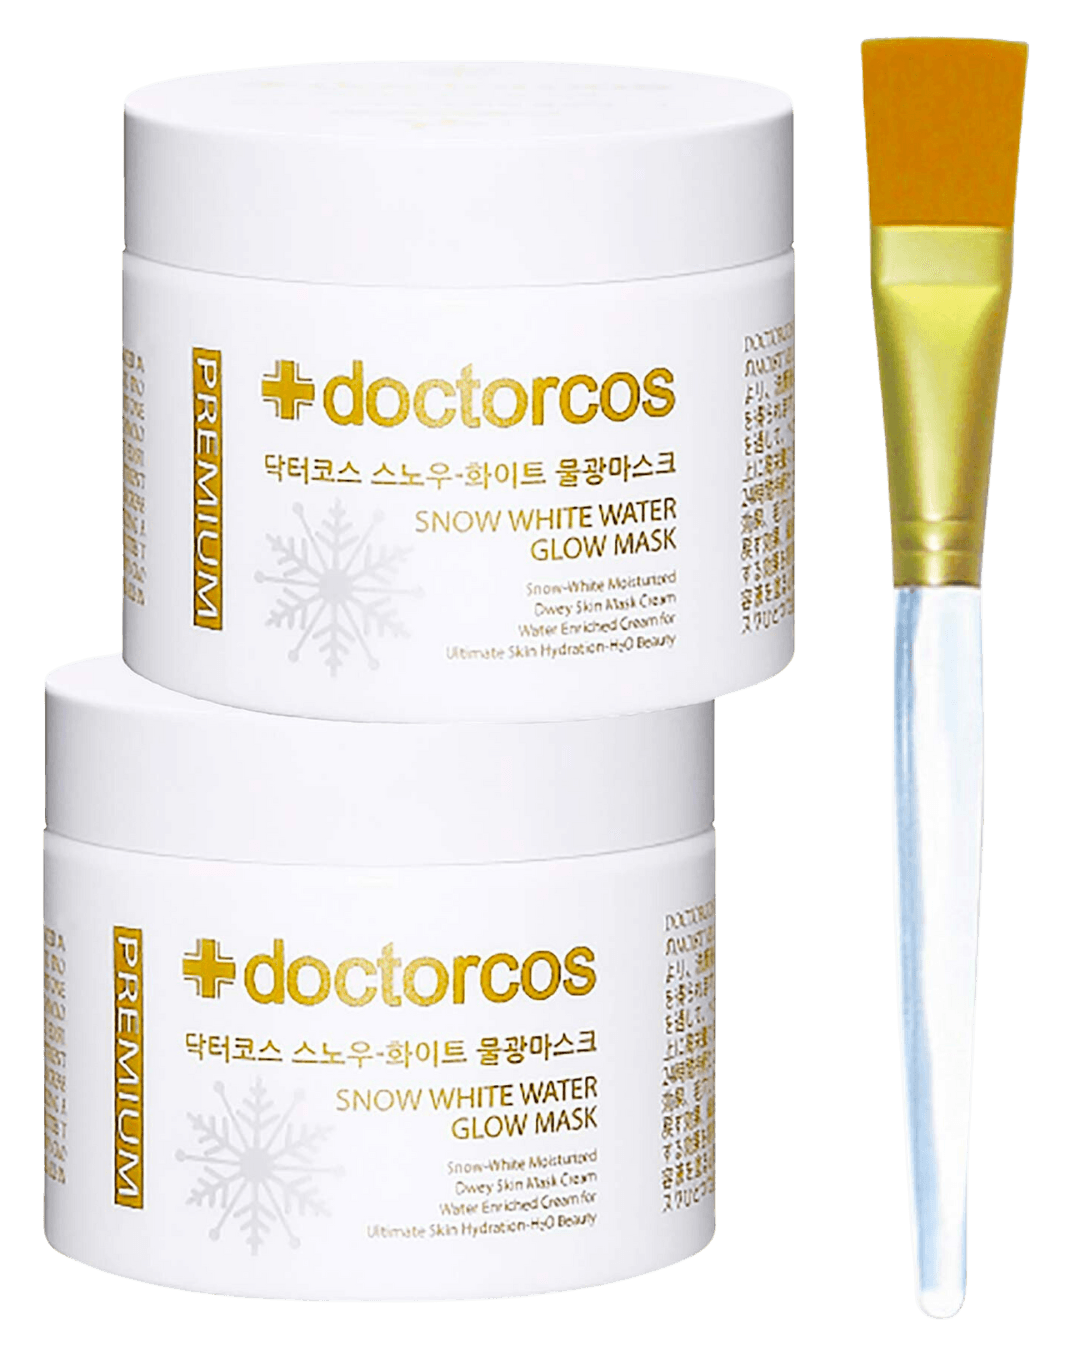 Doctorcos Snow White Water Glow Mask